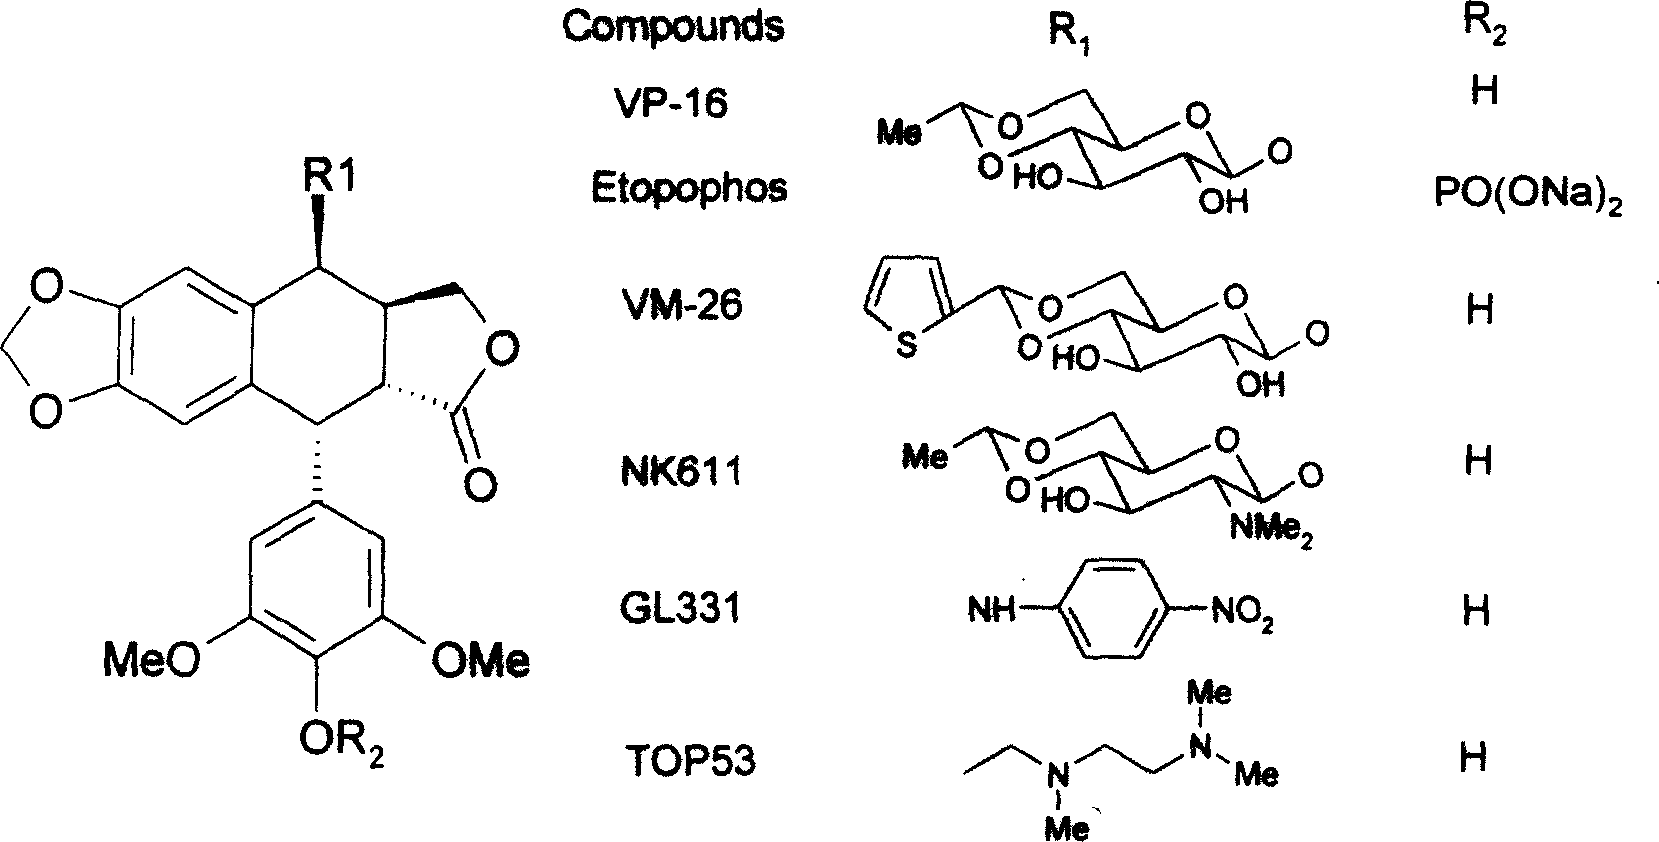 Podophyllotoxin compounds and their application and preparation process